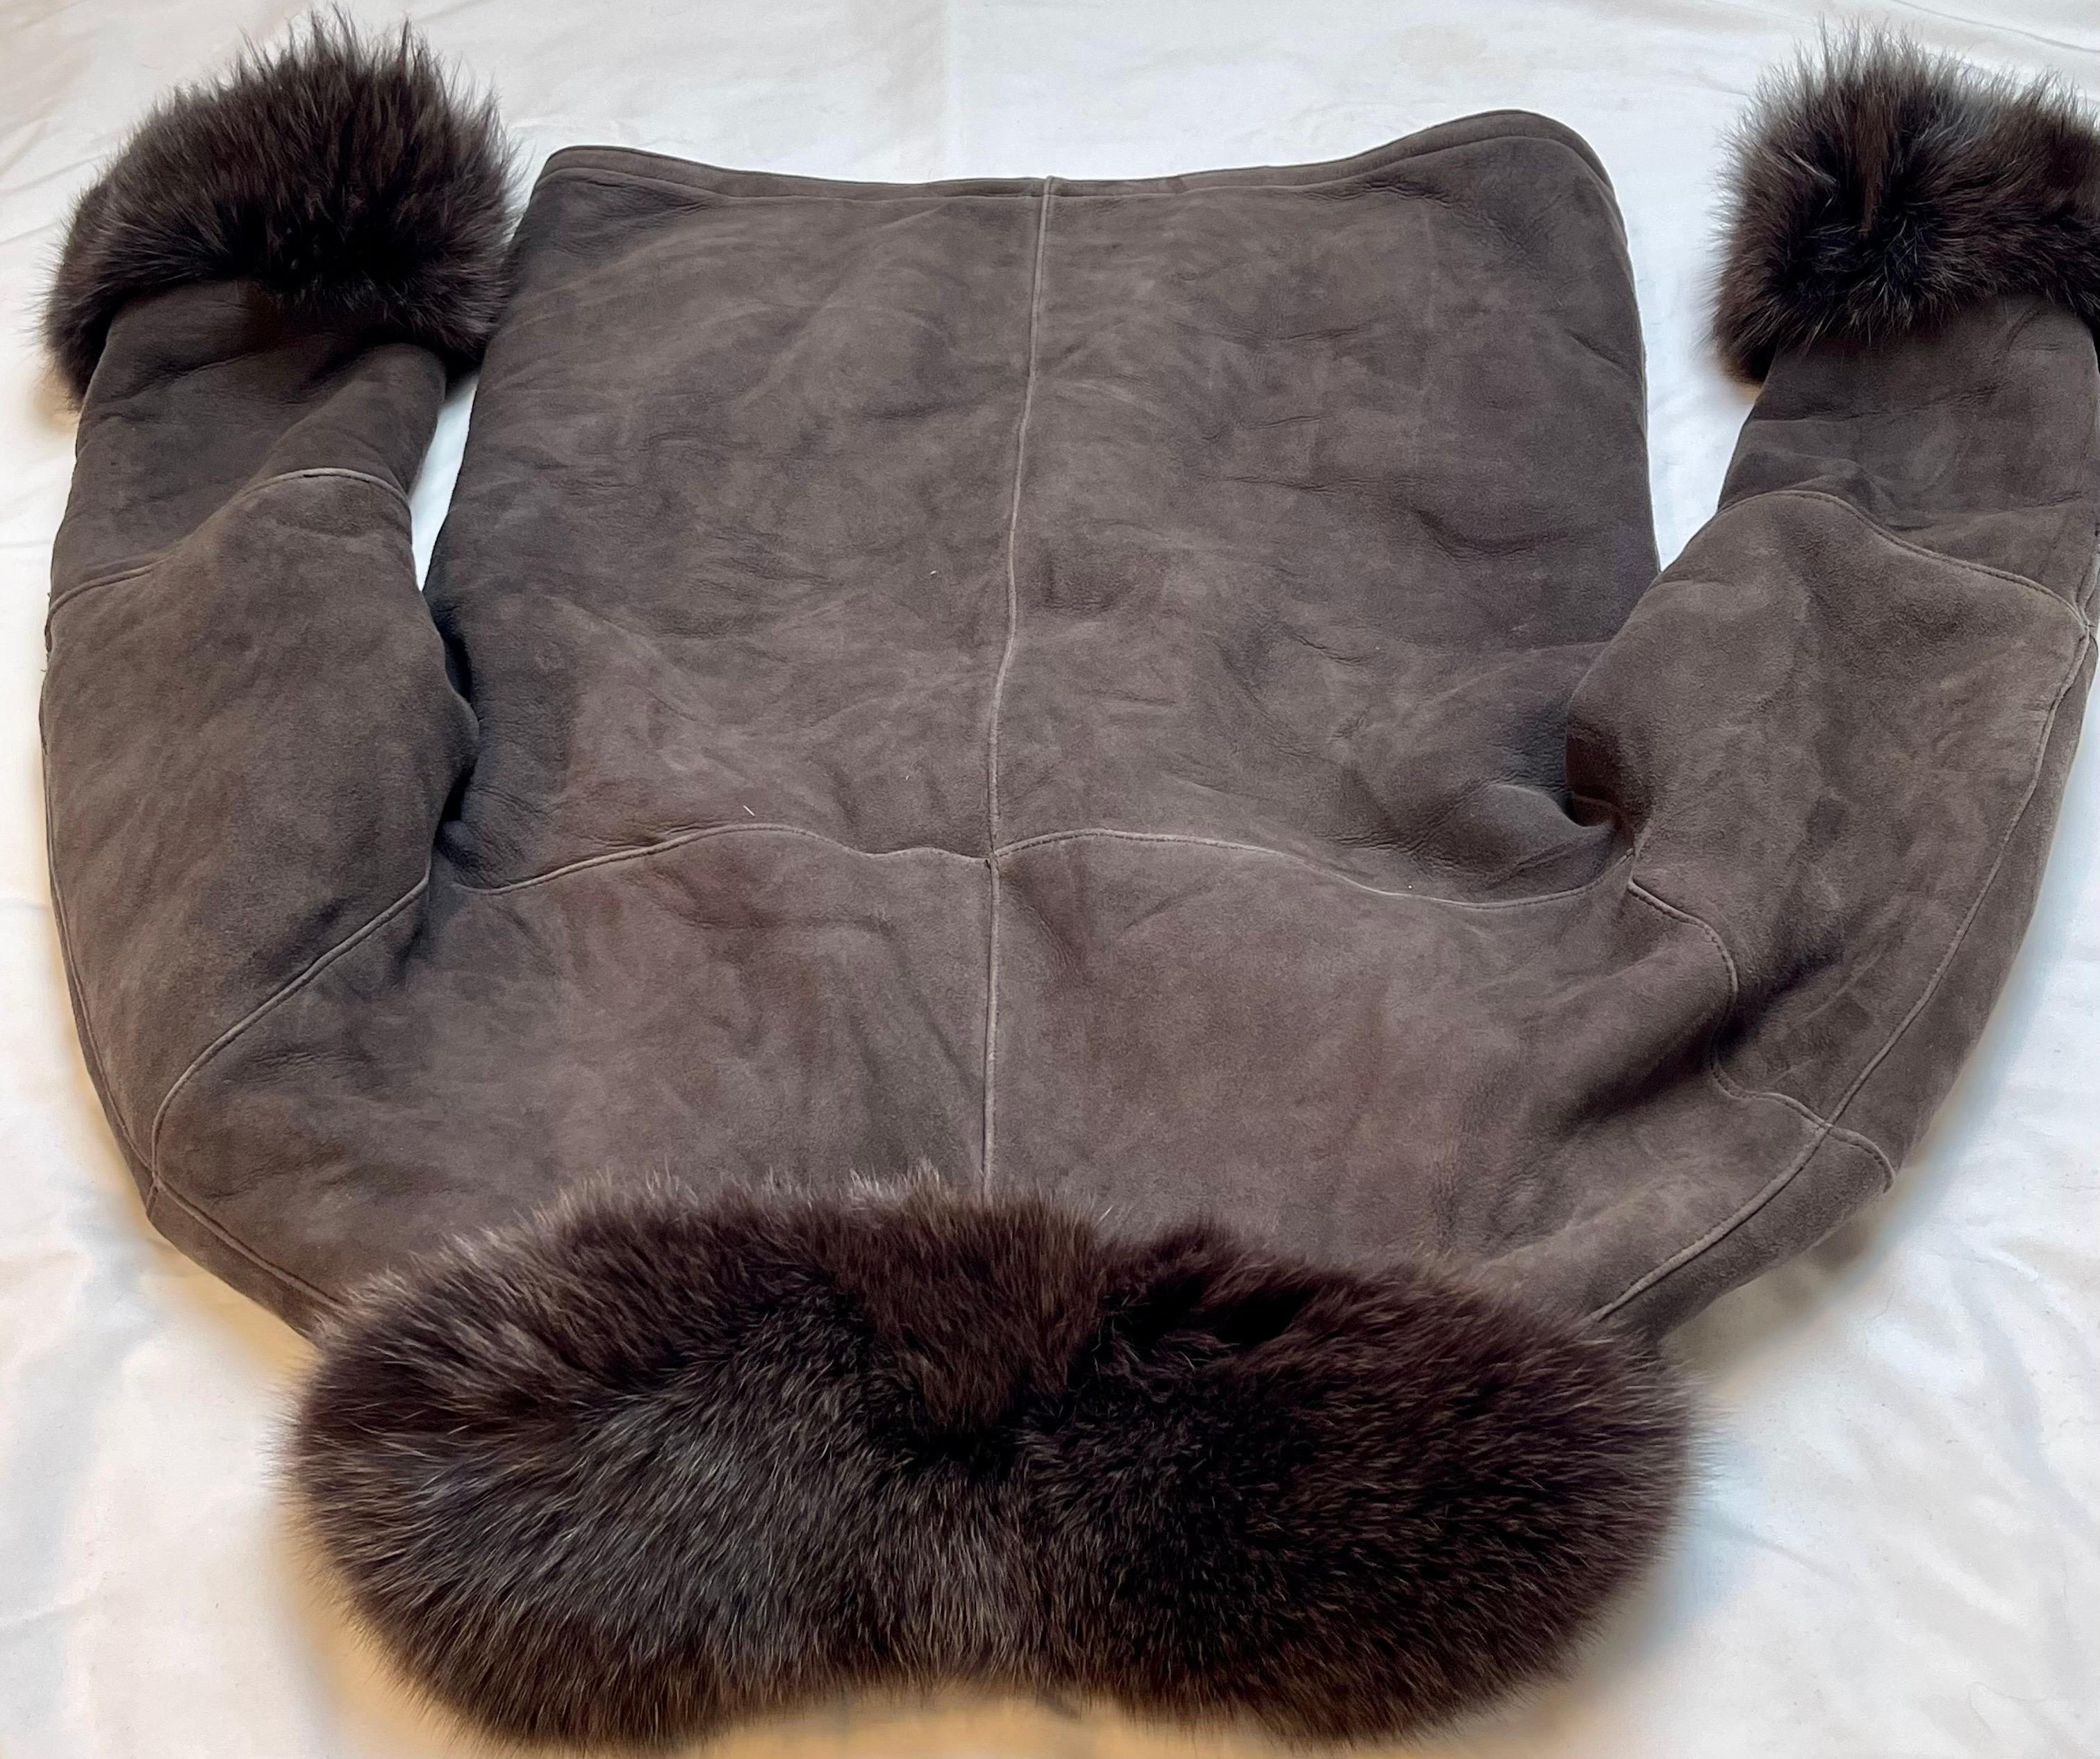   High Country Shearling Sheepskin Coat excellent condition Real Fur 3